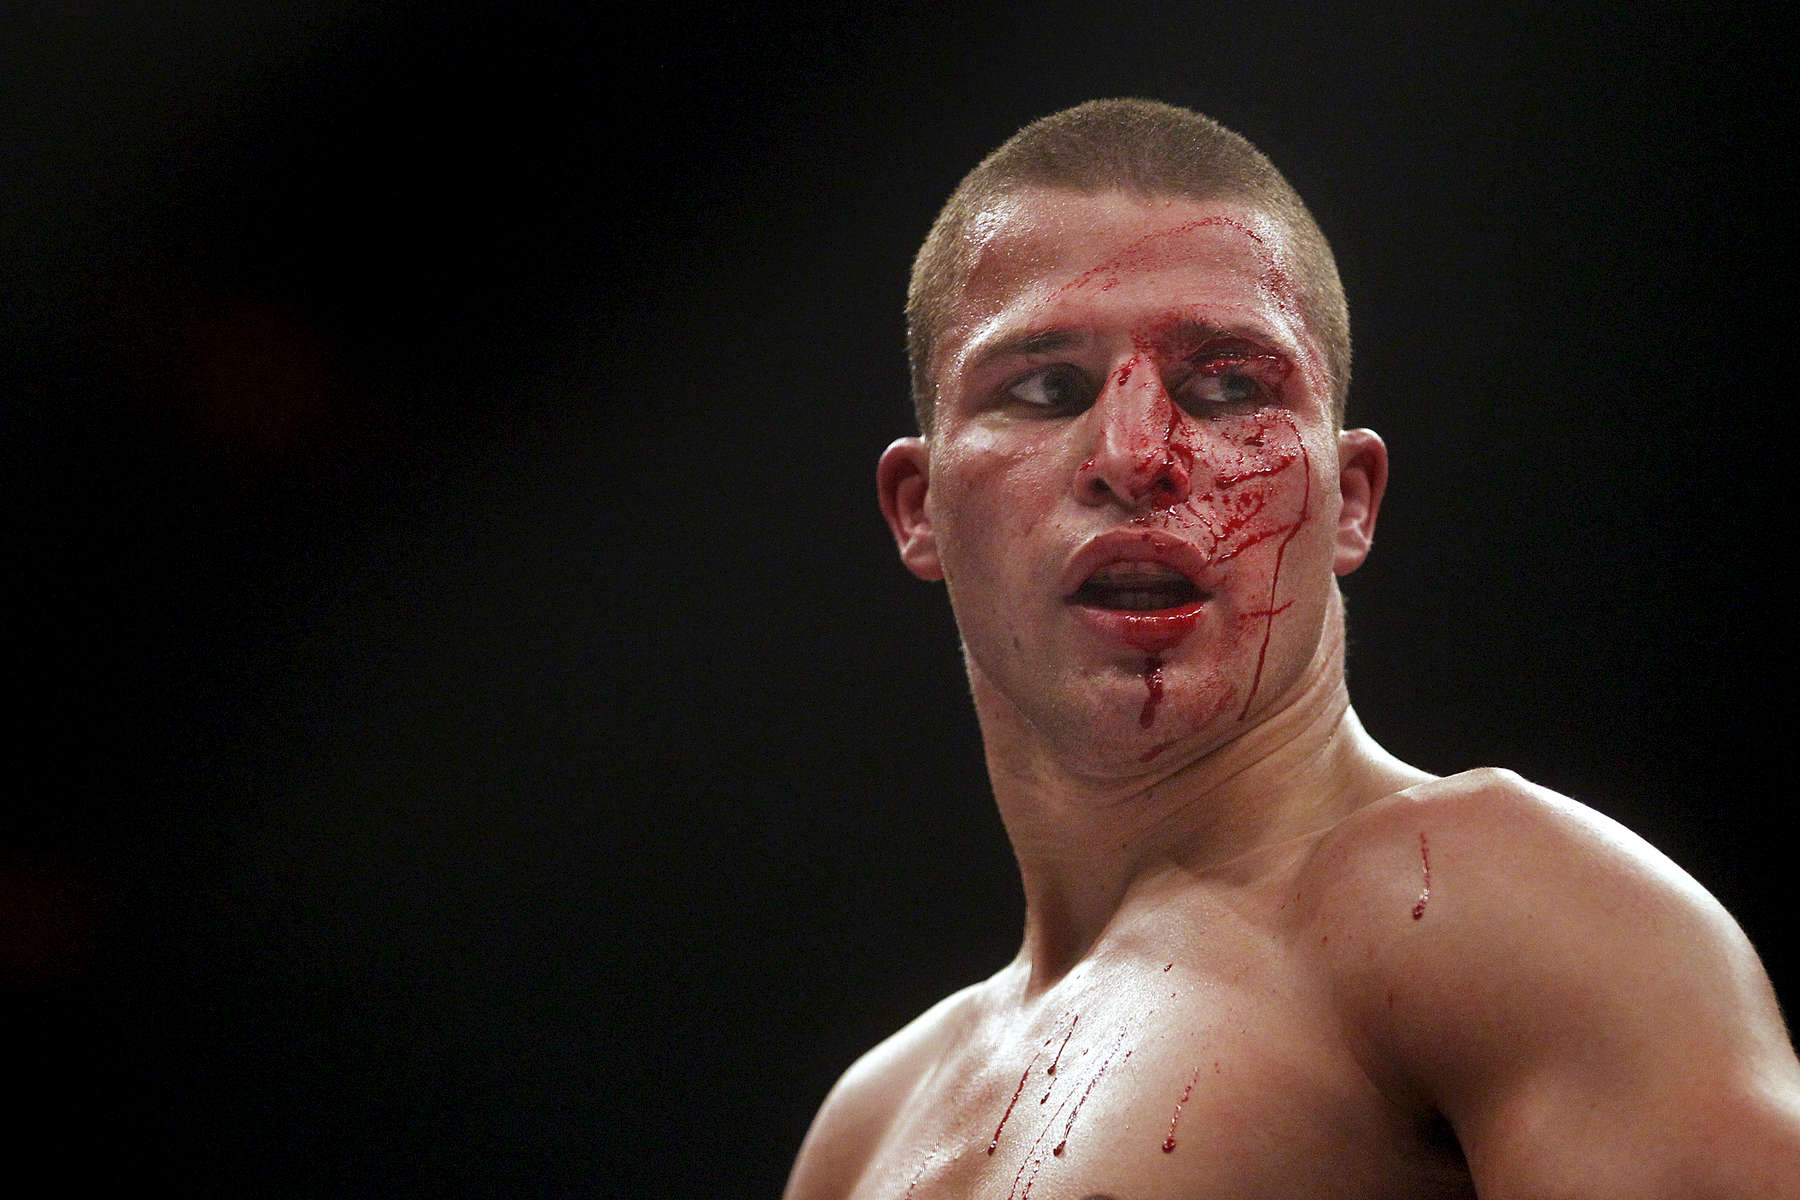 Max Baumert looks off in the distance while bleeding during his match against Josh Jauncey during Friday's SuperFight presented by Glory Sports International at the Hampton Coliseum. The fight was called due to Baumert's injury. 